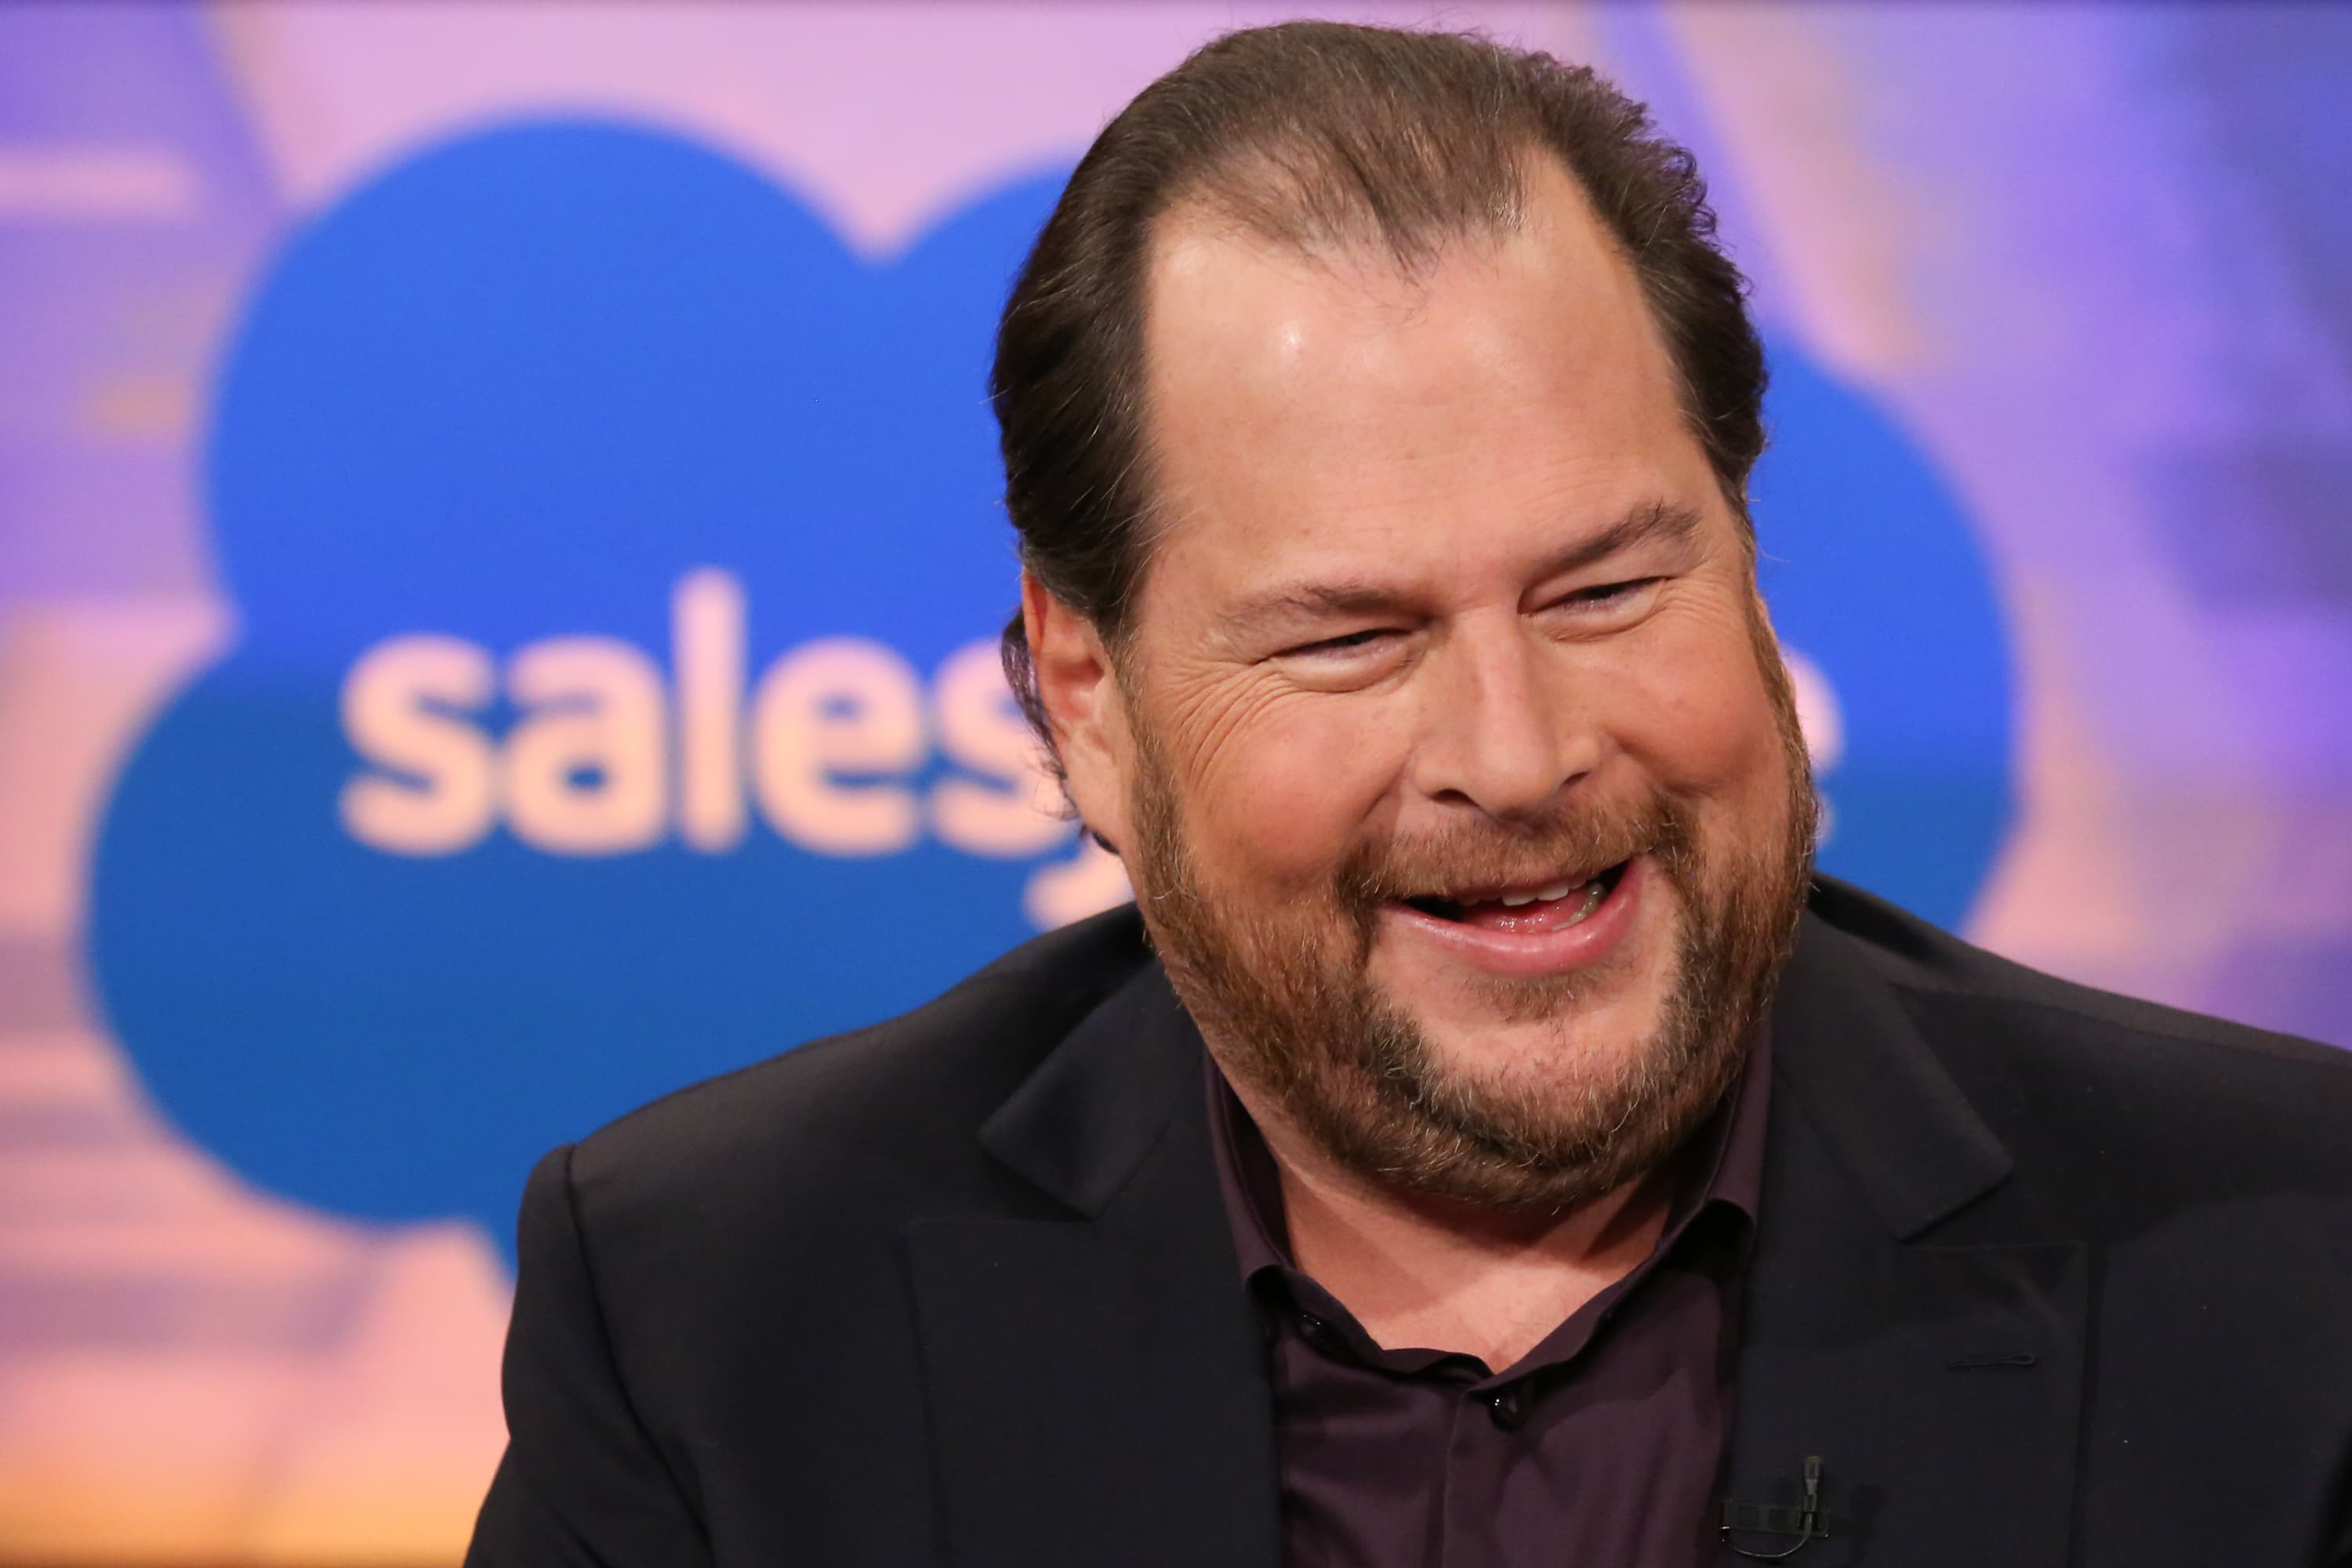 Biden says what others are 'afraid to say' about tech, Salesforce's Marc Benioff says